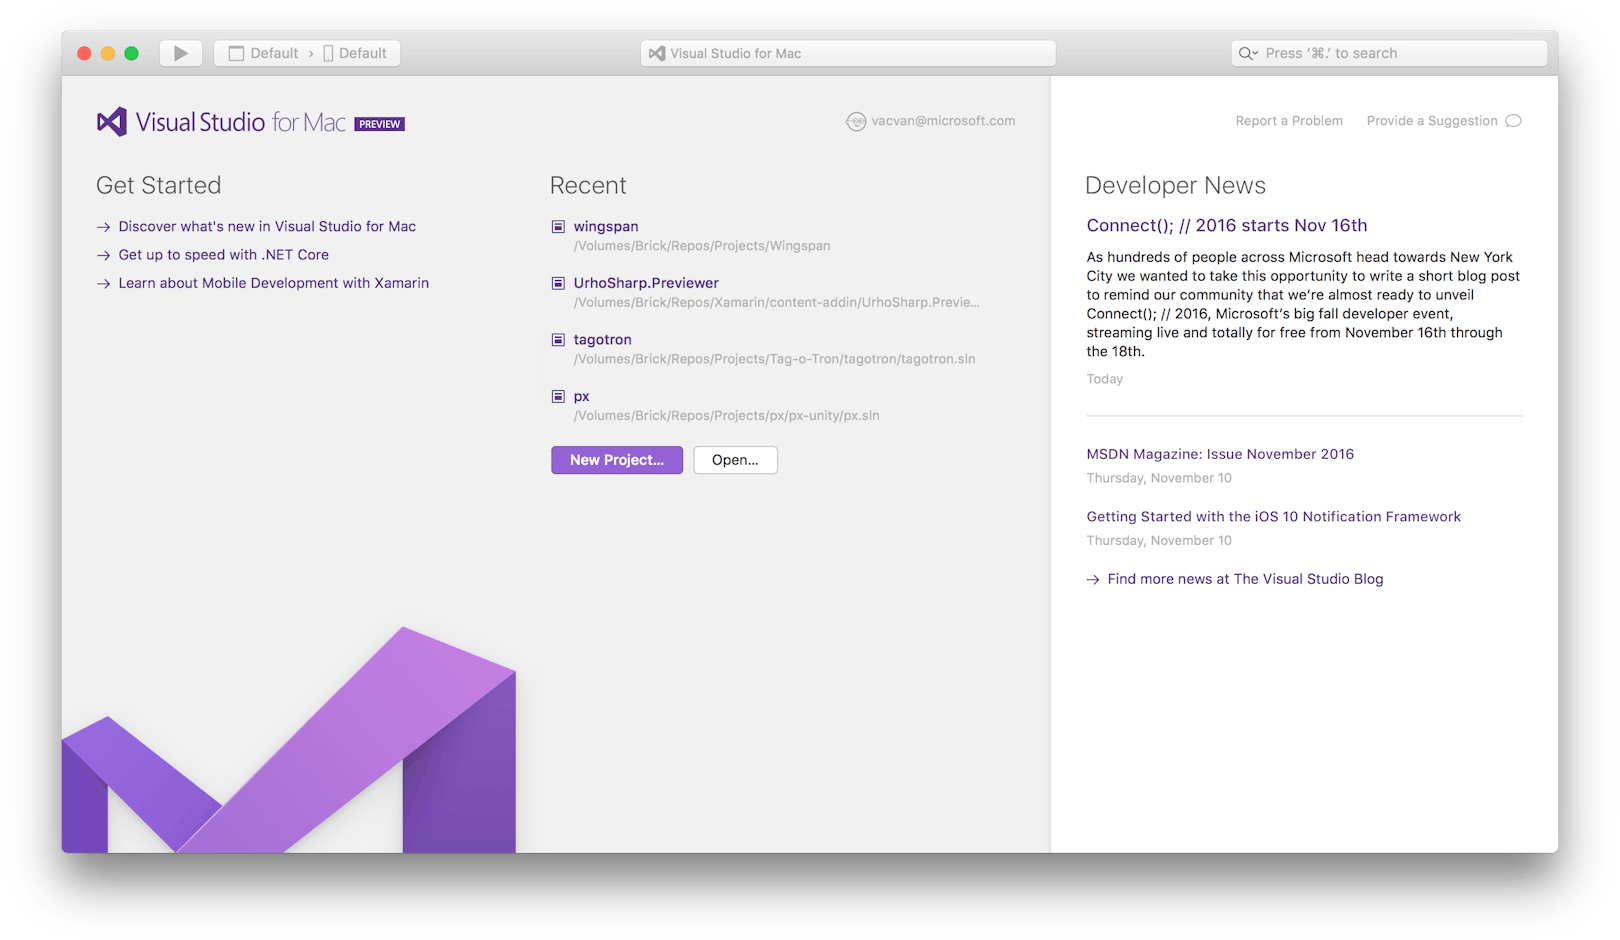 Final design of the Welcome Screen in Visual Studio for Mac in the light UI theme